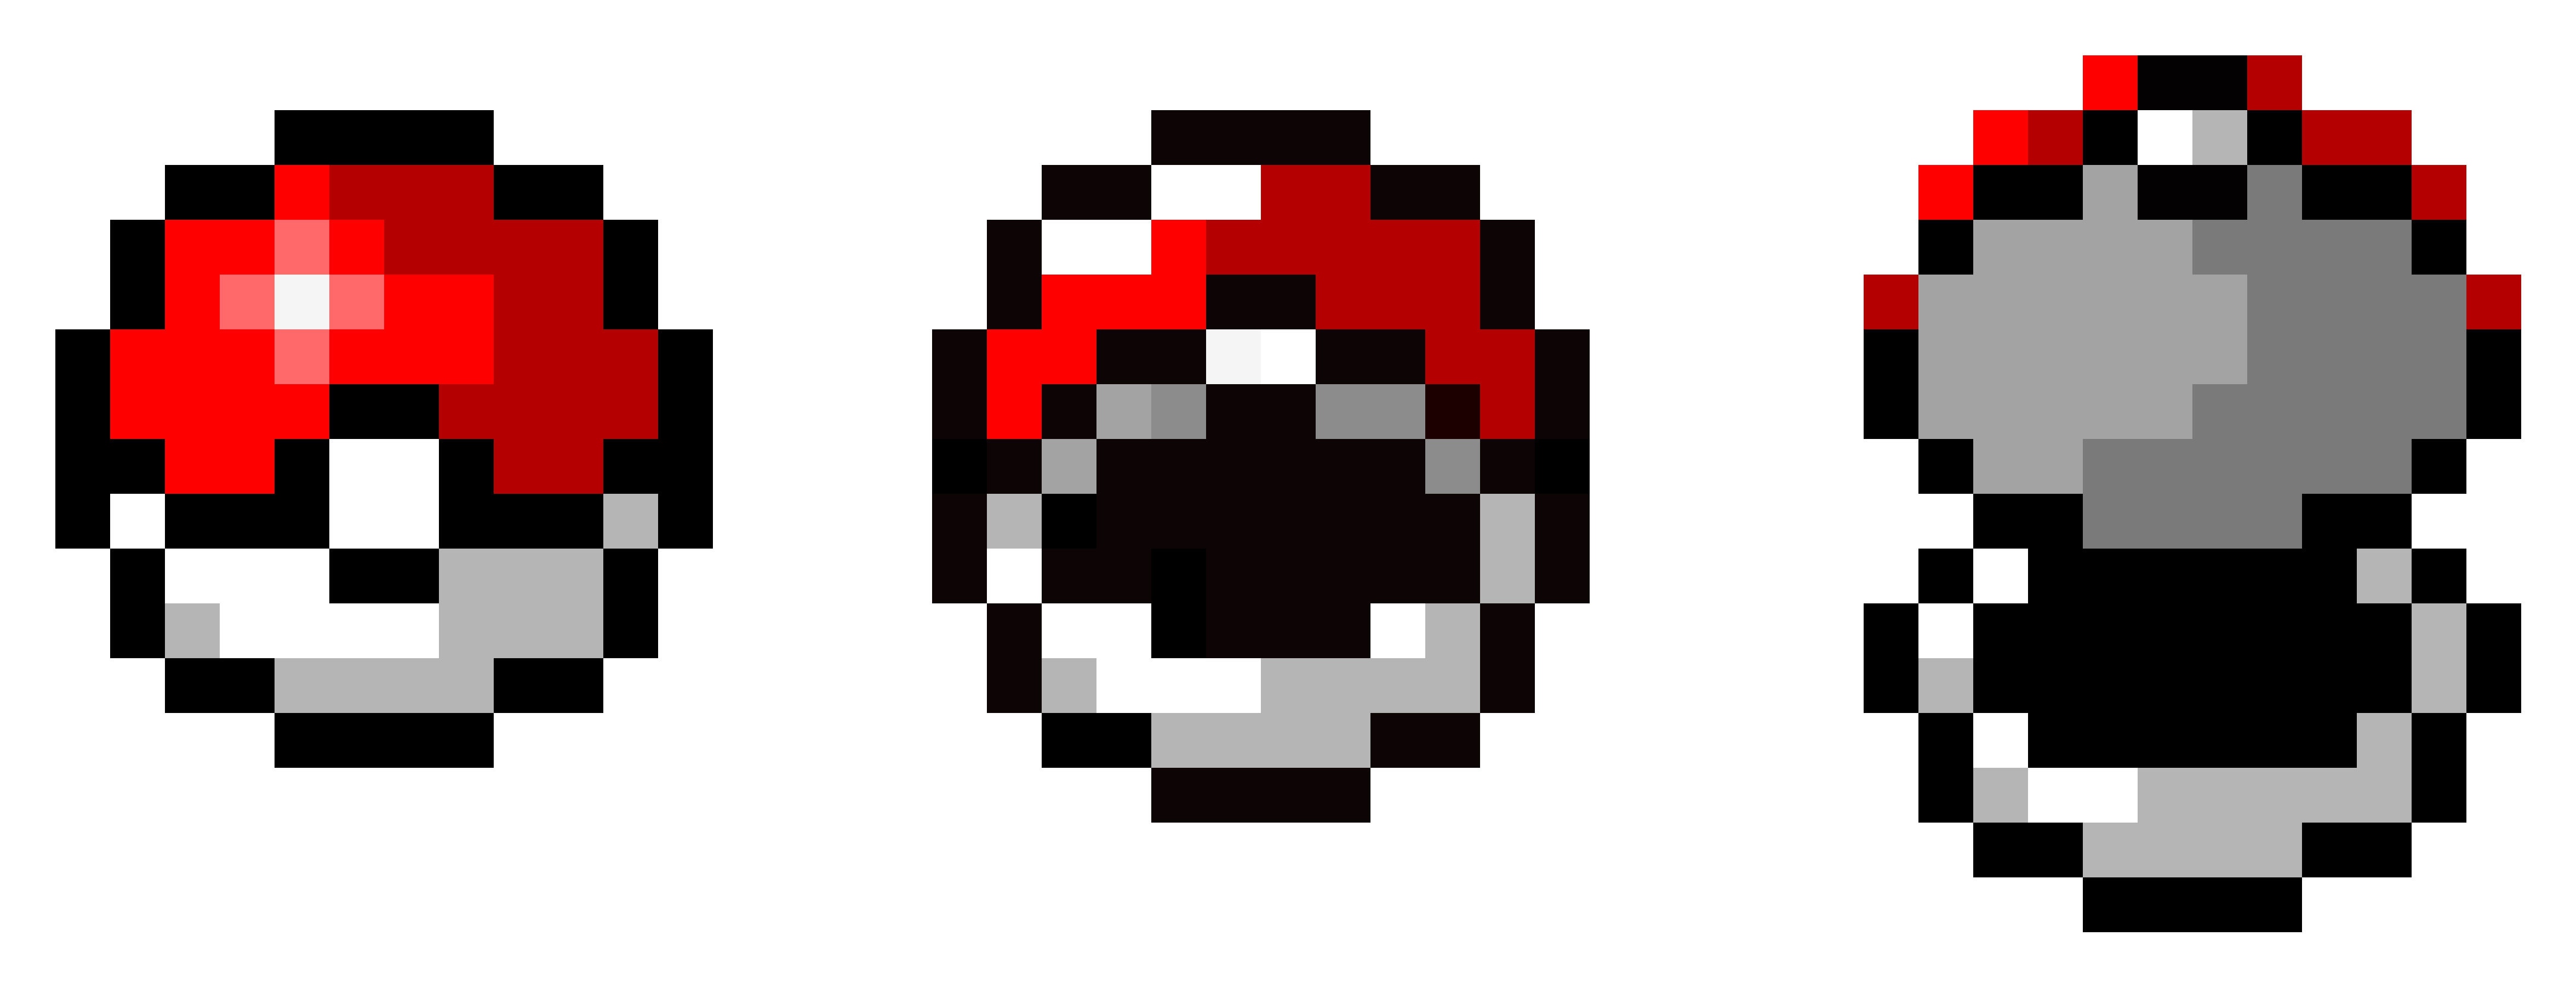 Pokeball Open Png - Portable Network Graphics (6600x2900), Png Download